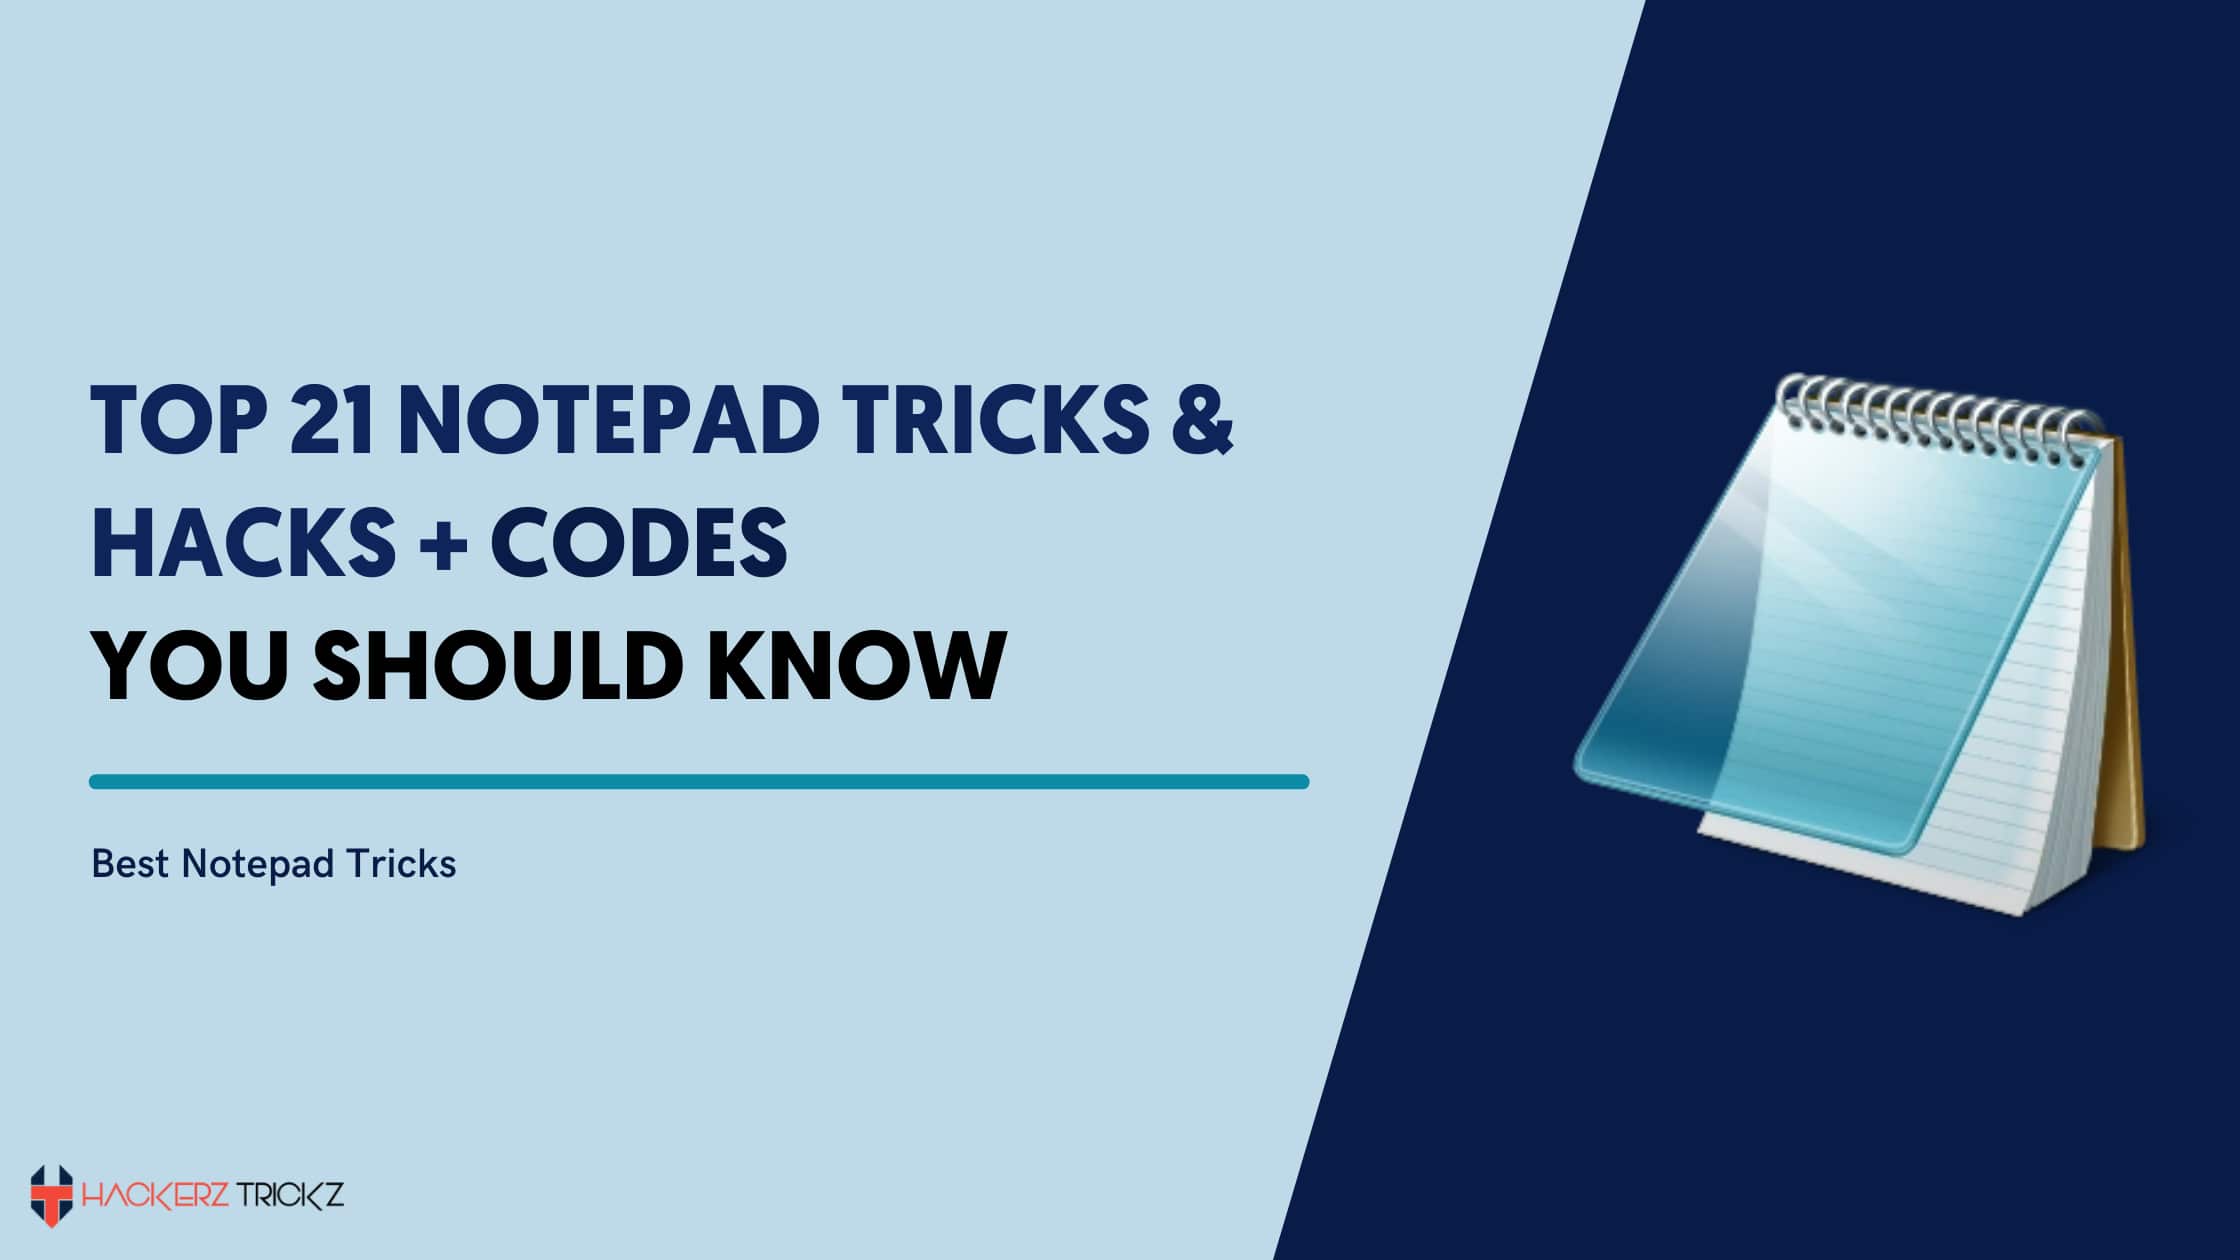 Top 21 Notepad Tricks & Hacks + Codes You Should Know